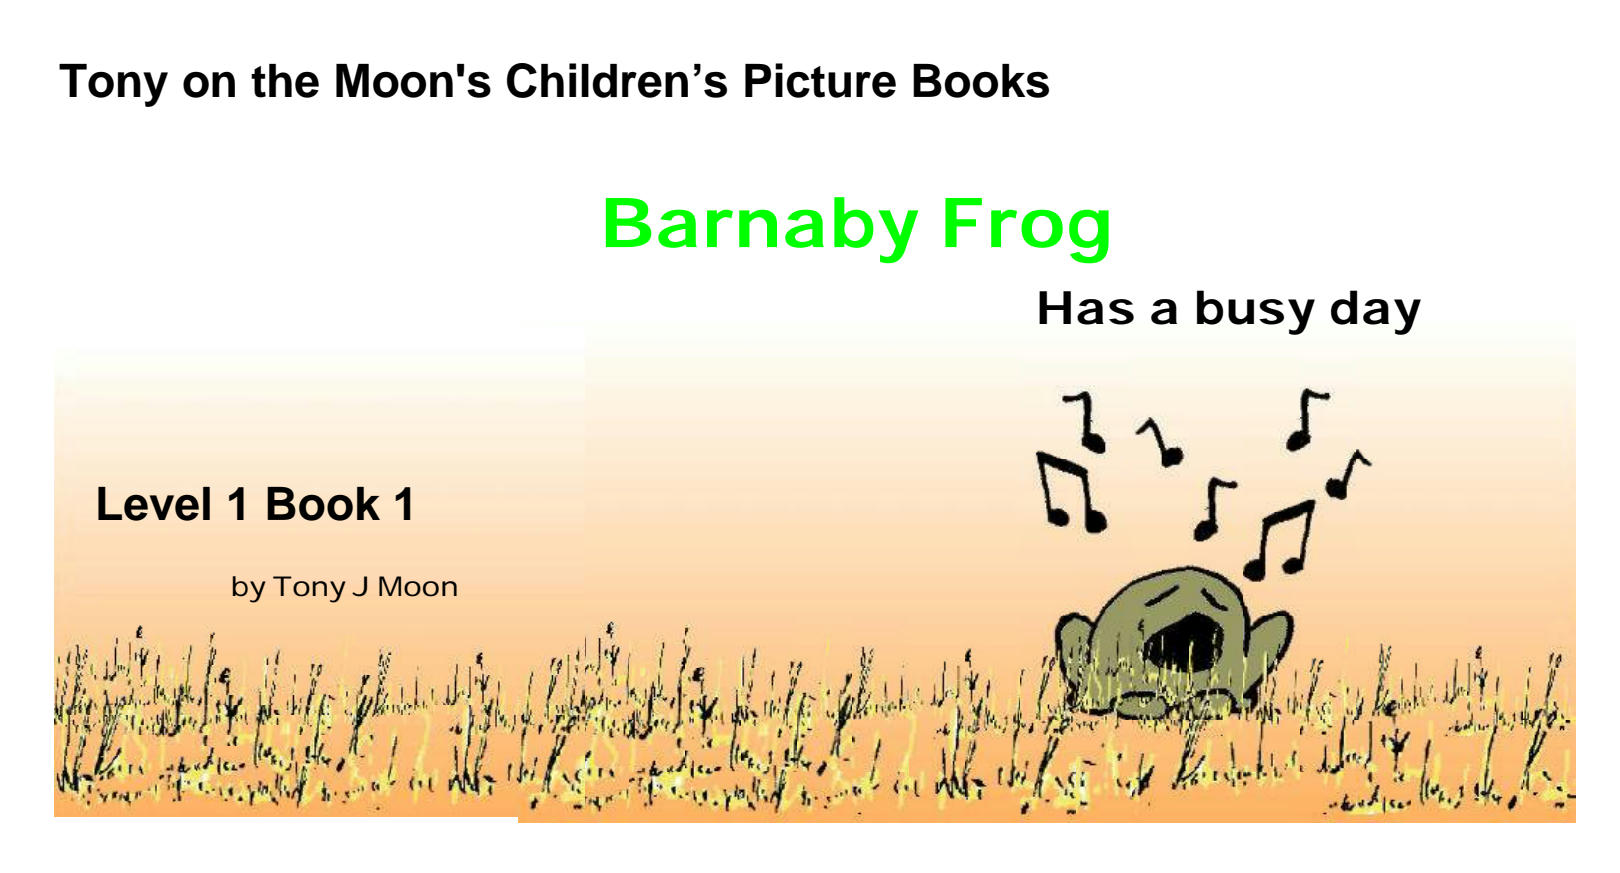 barnaby-frog-has-a-busy-day